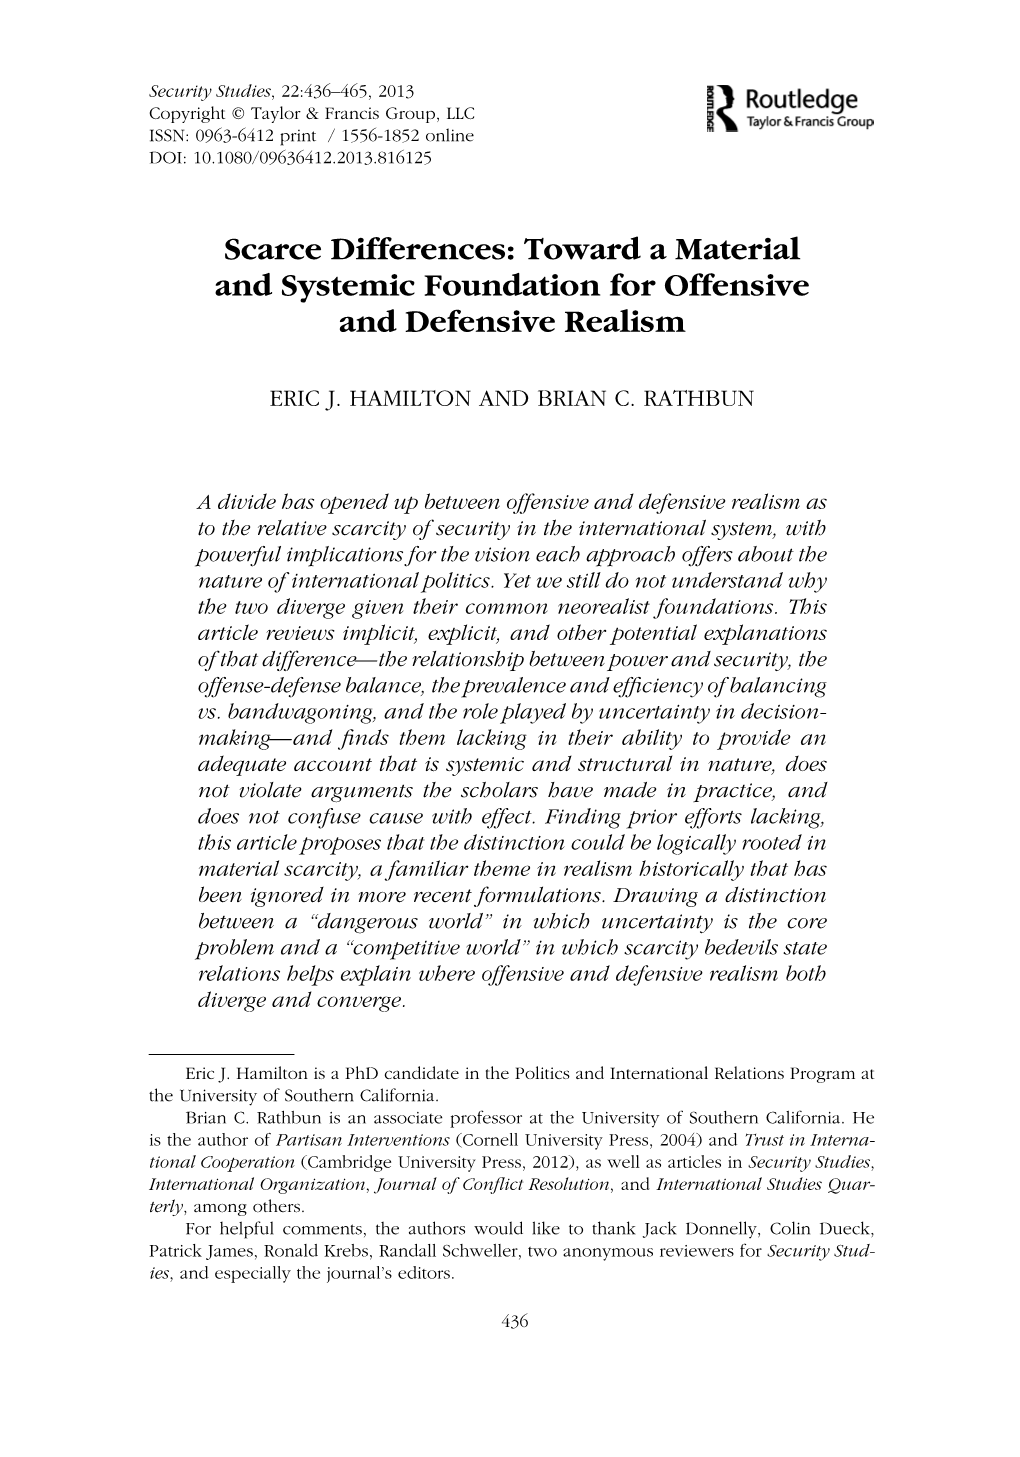 Scarce Differences: Toward a Material and Systemic Foundation for Offensive and Defensive Realism